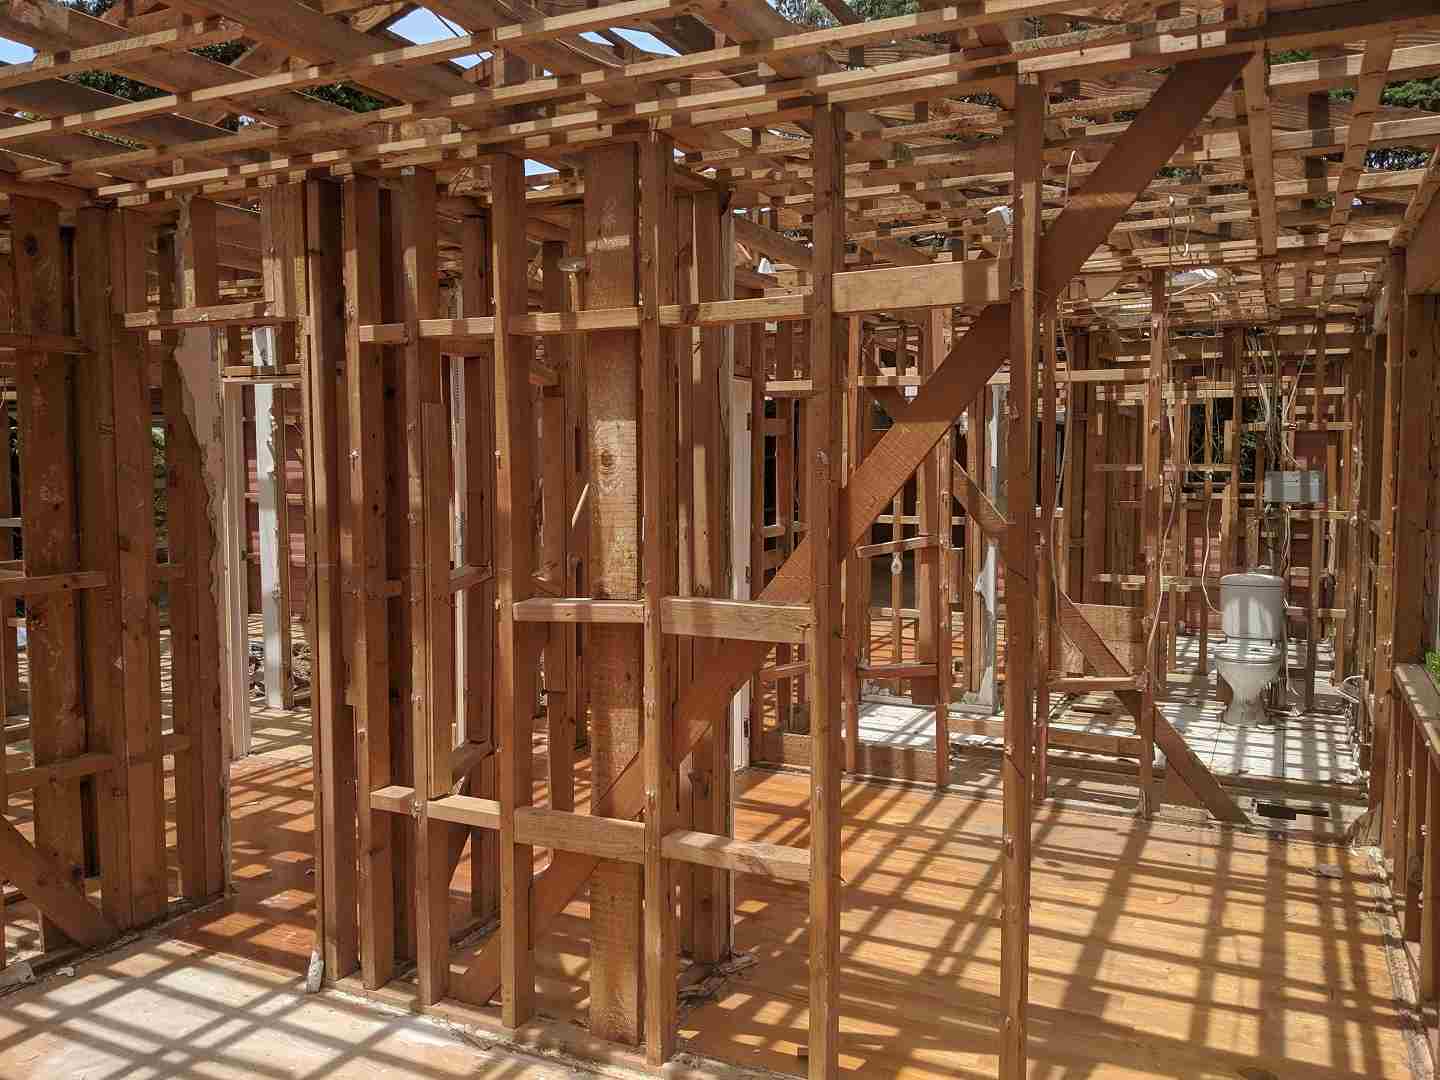 Strip out non-structural elements